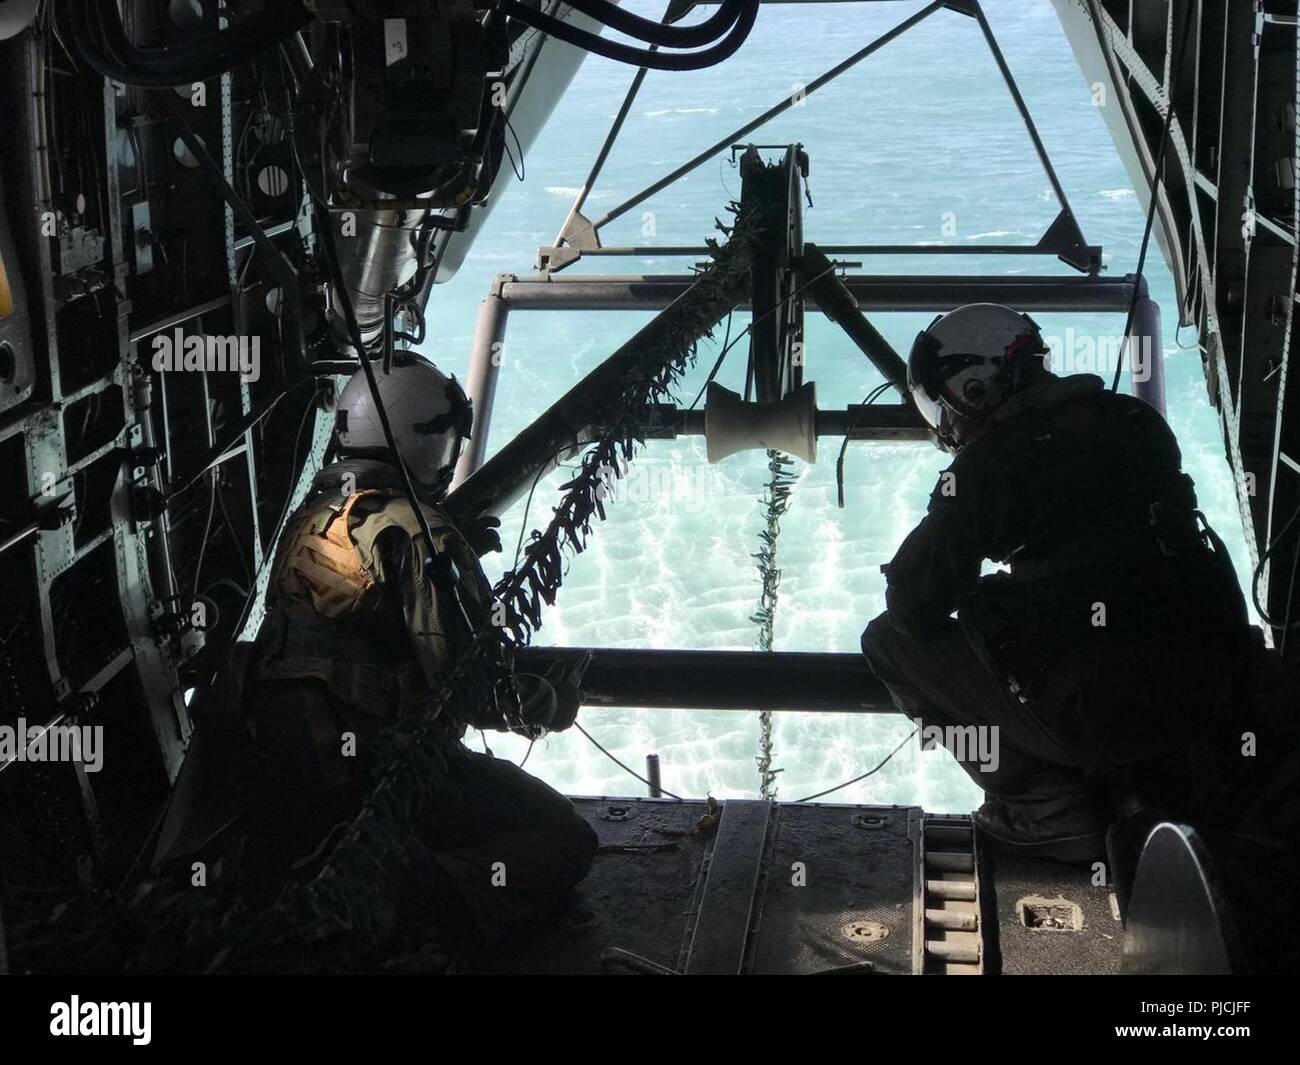 PACIFIC OCEAN (July 24, 2018) Helicopter Mine Countermeasure Squadron Fourteen (HM-14) Naval Aircrewmen (Helicopter) 2nd Class Prickett (left) and McIntyre (right), monitor the towing cable for an AN/AQS-24B Mine Hunting System from an MH-53E Sea Dragon helicopter off the coast of Southern California during a mine hunting exercise as part of Rim of the Pacific (RIMPAC) exercise, July 24. Twenty-five nations, 46 ships, five submarines, about 200 aircraft and 25,000 personnel are participating in RIMPAC from June 27 to Aug. 2 in and around the Hawaiian Islands and Southern California. The world’ Stock Photo